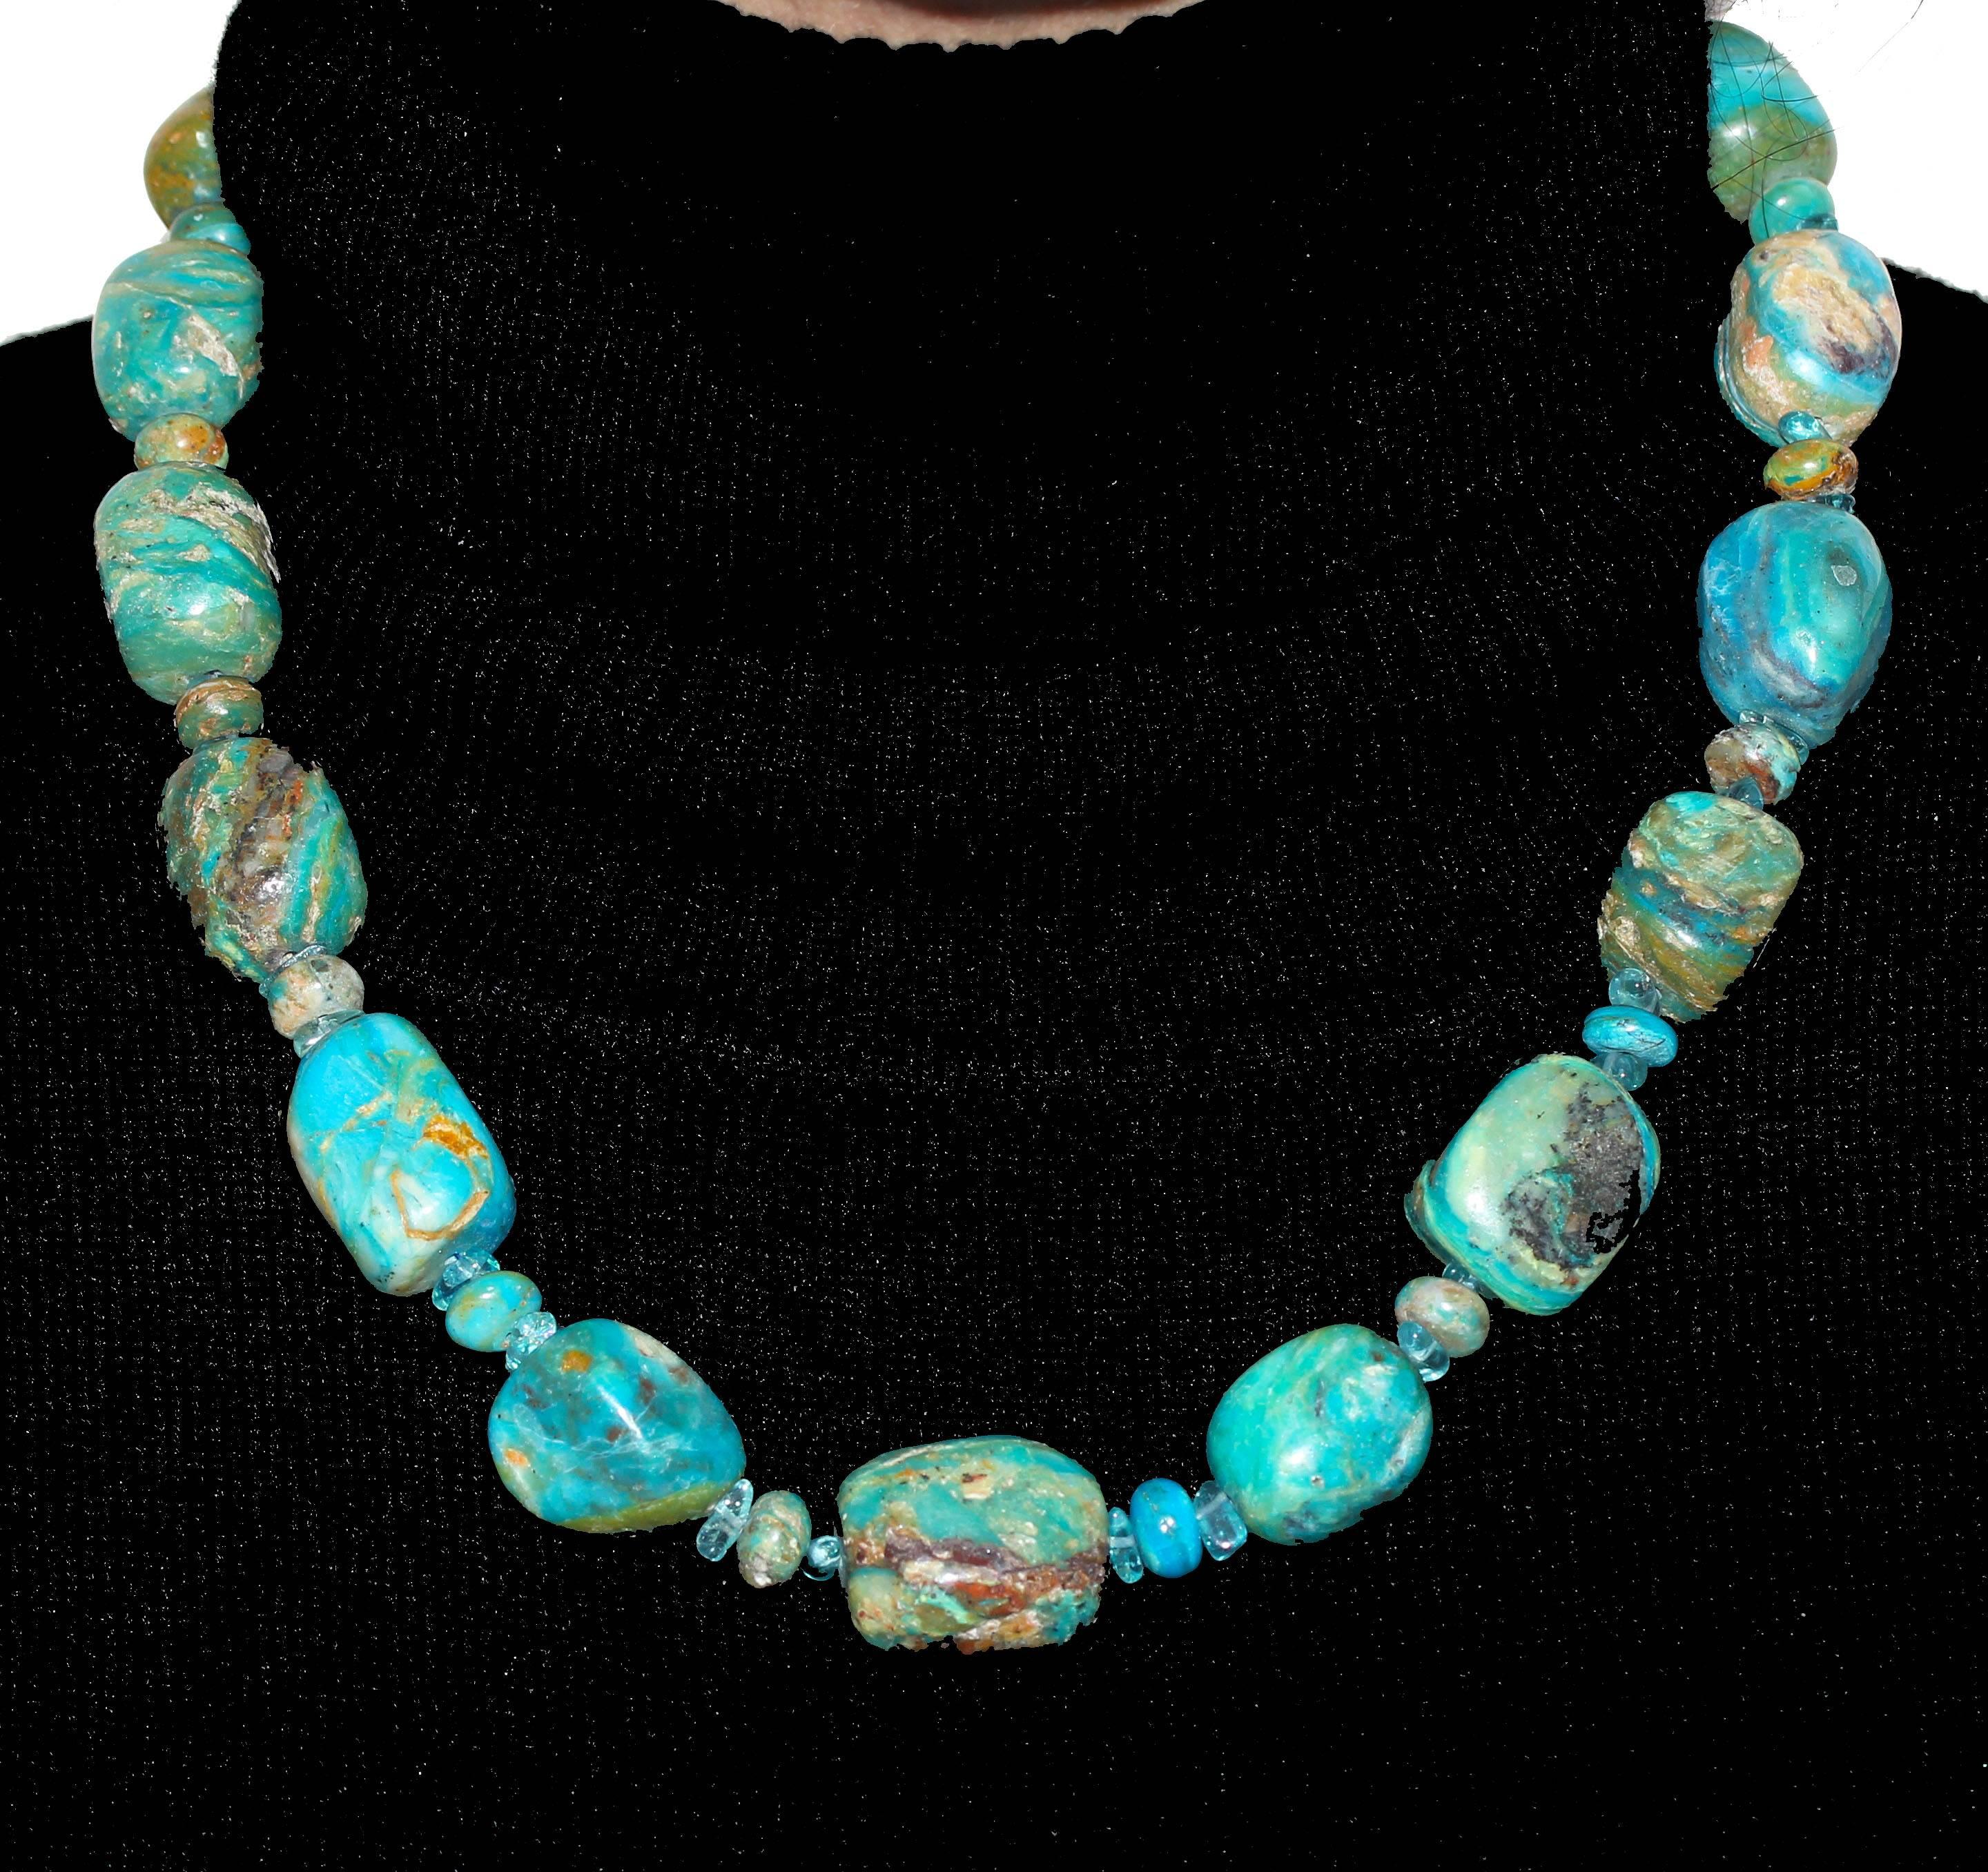 Naturally gently polished newly discovered exquisite blue real Peruvian Opals enhanced with brilliant blue natural Apatite polished chips.  It measures 19.5 inches long.  Magnificent on both white and black shirts for lunch, cocktails or dinner.